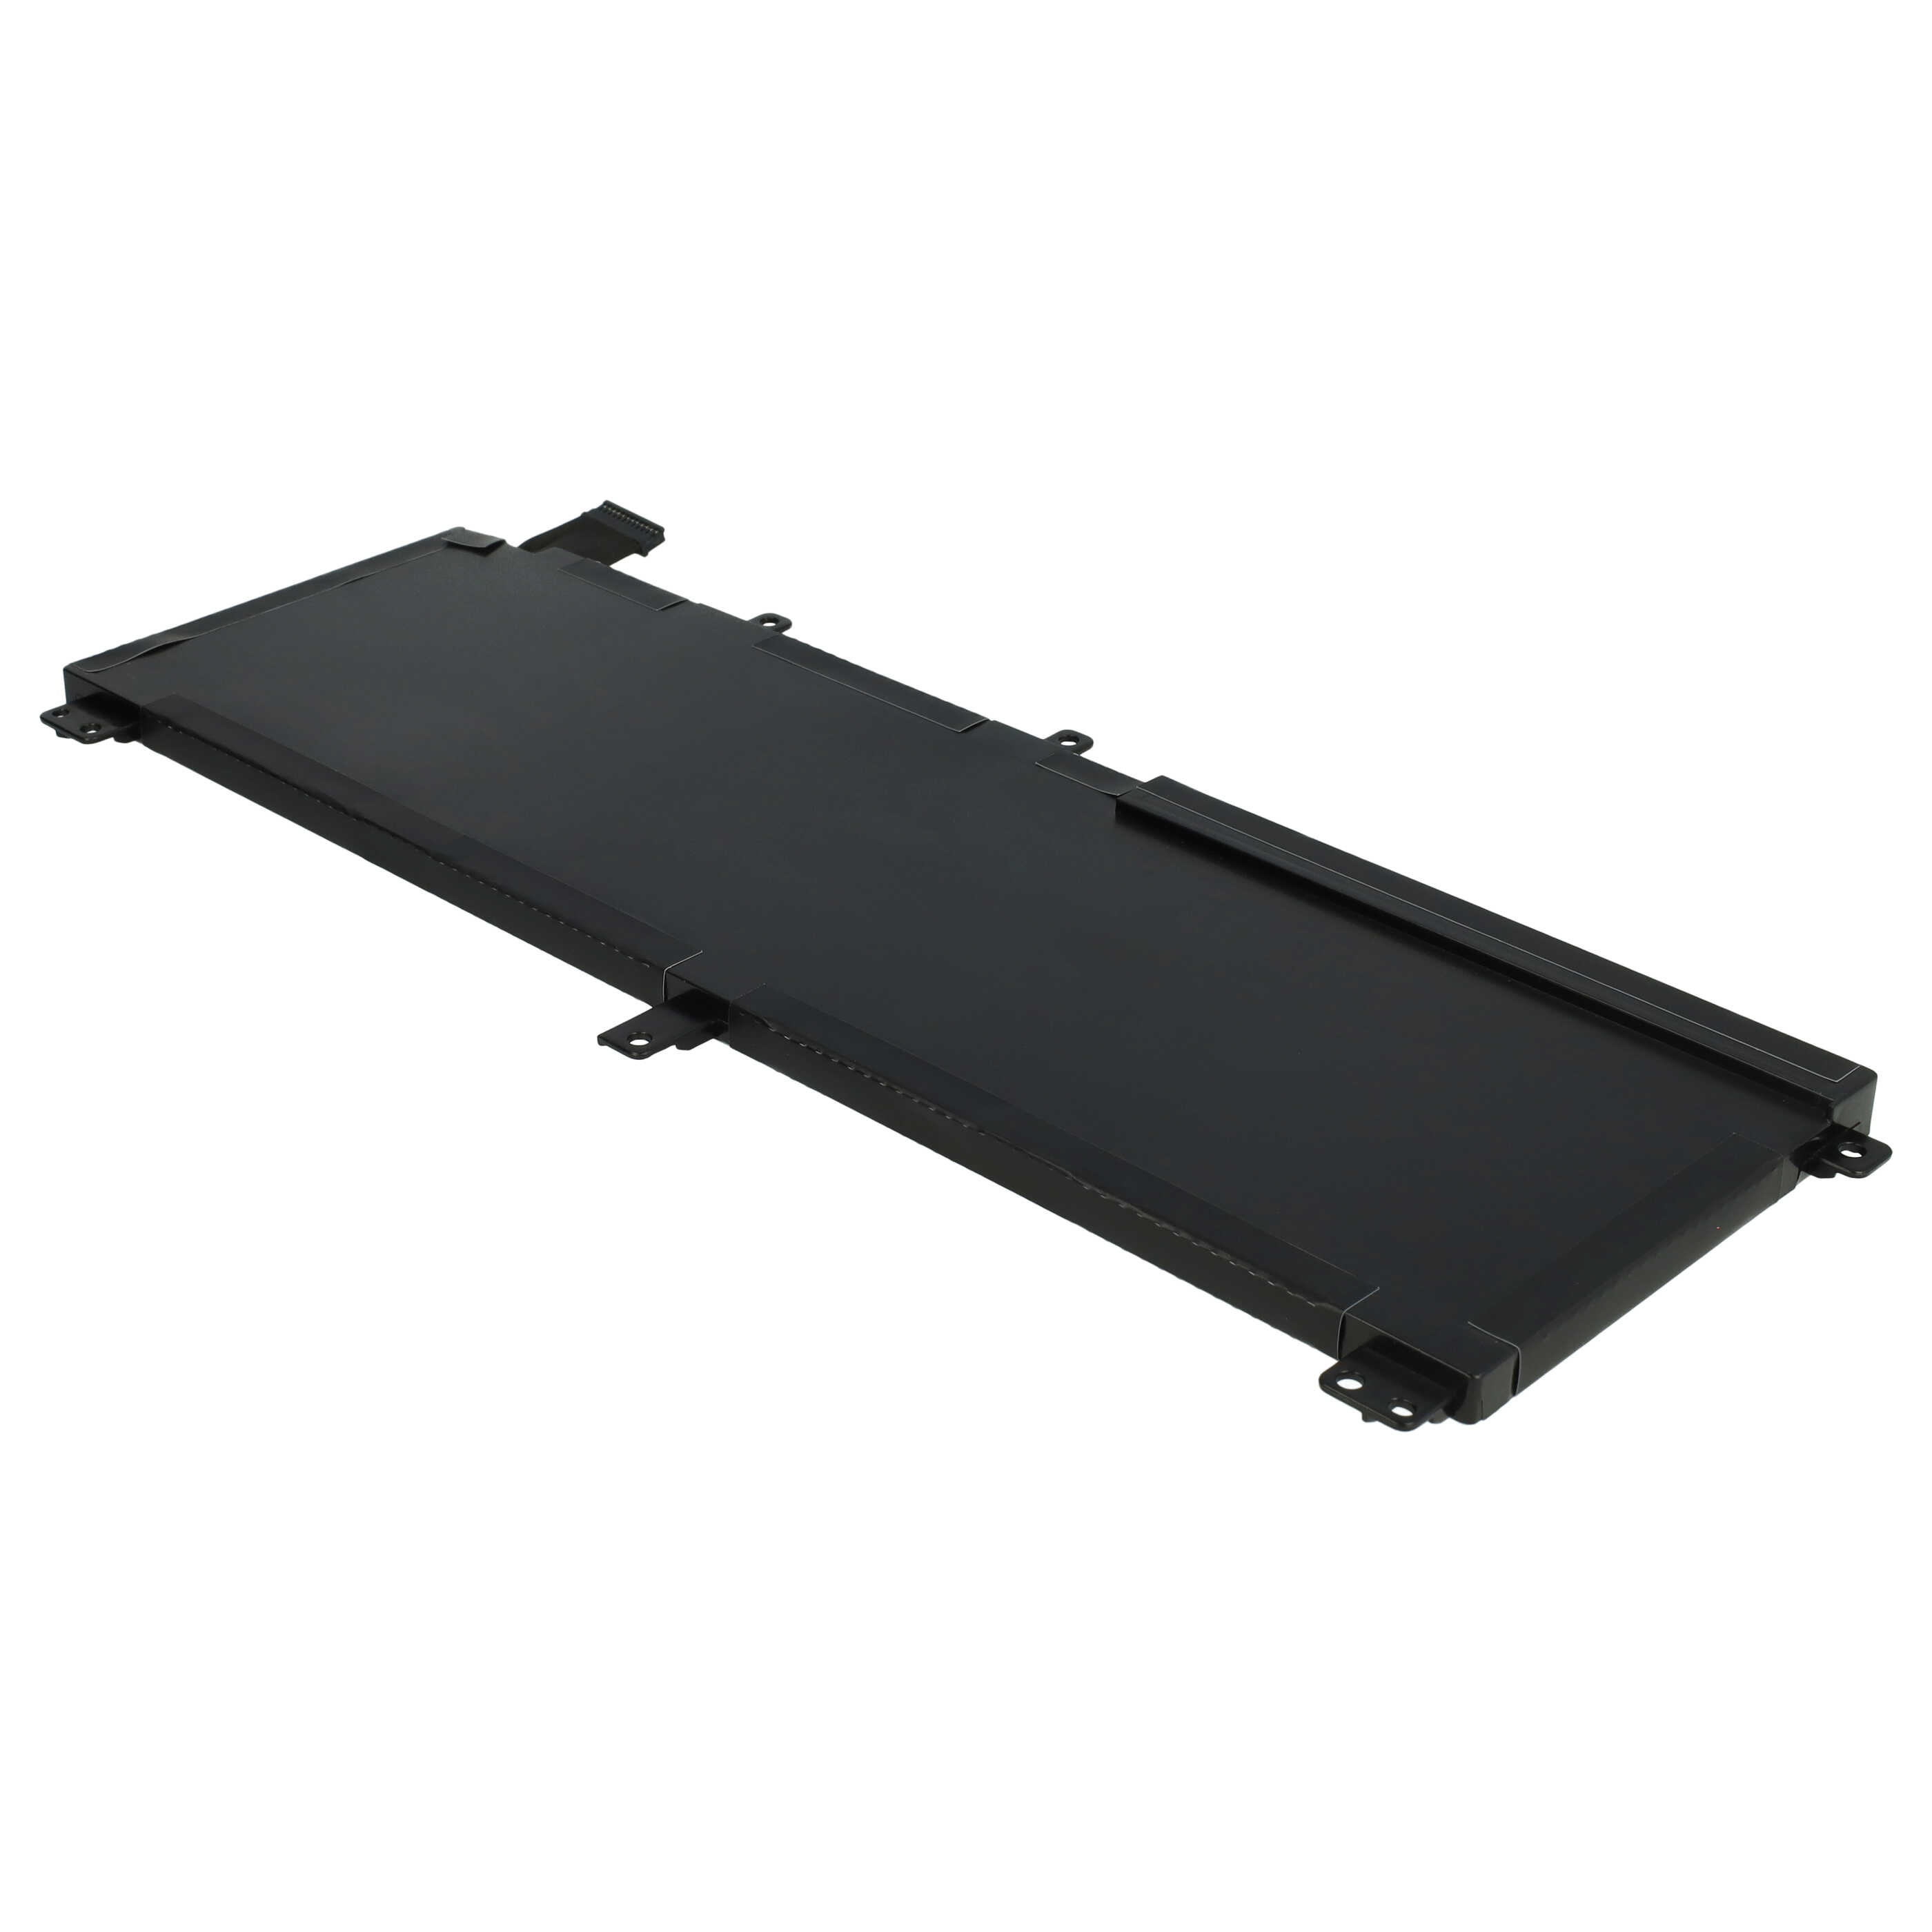 Notebook Battery Replacement for Dell 0H76MY, 245RR, 7D1WJ, 07D1WJ, CN-0T0TRM - 5400mAh 11.1V Li-polymer